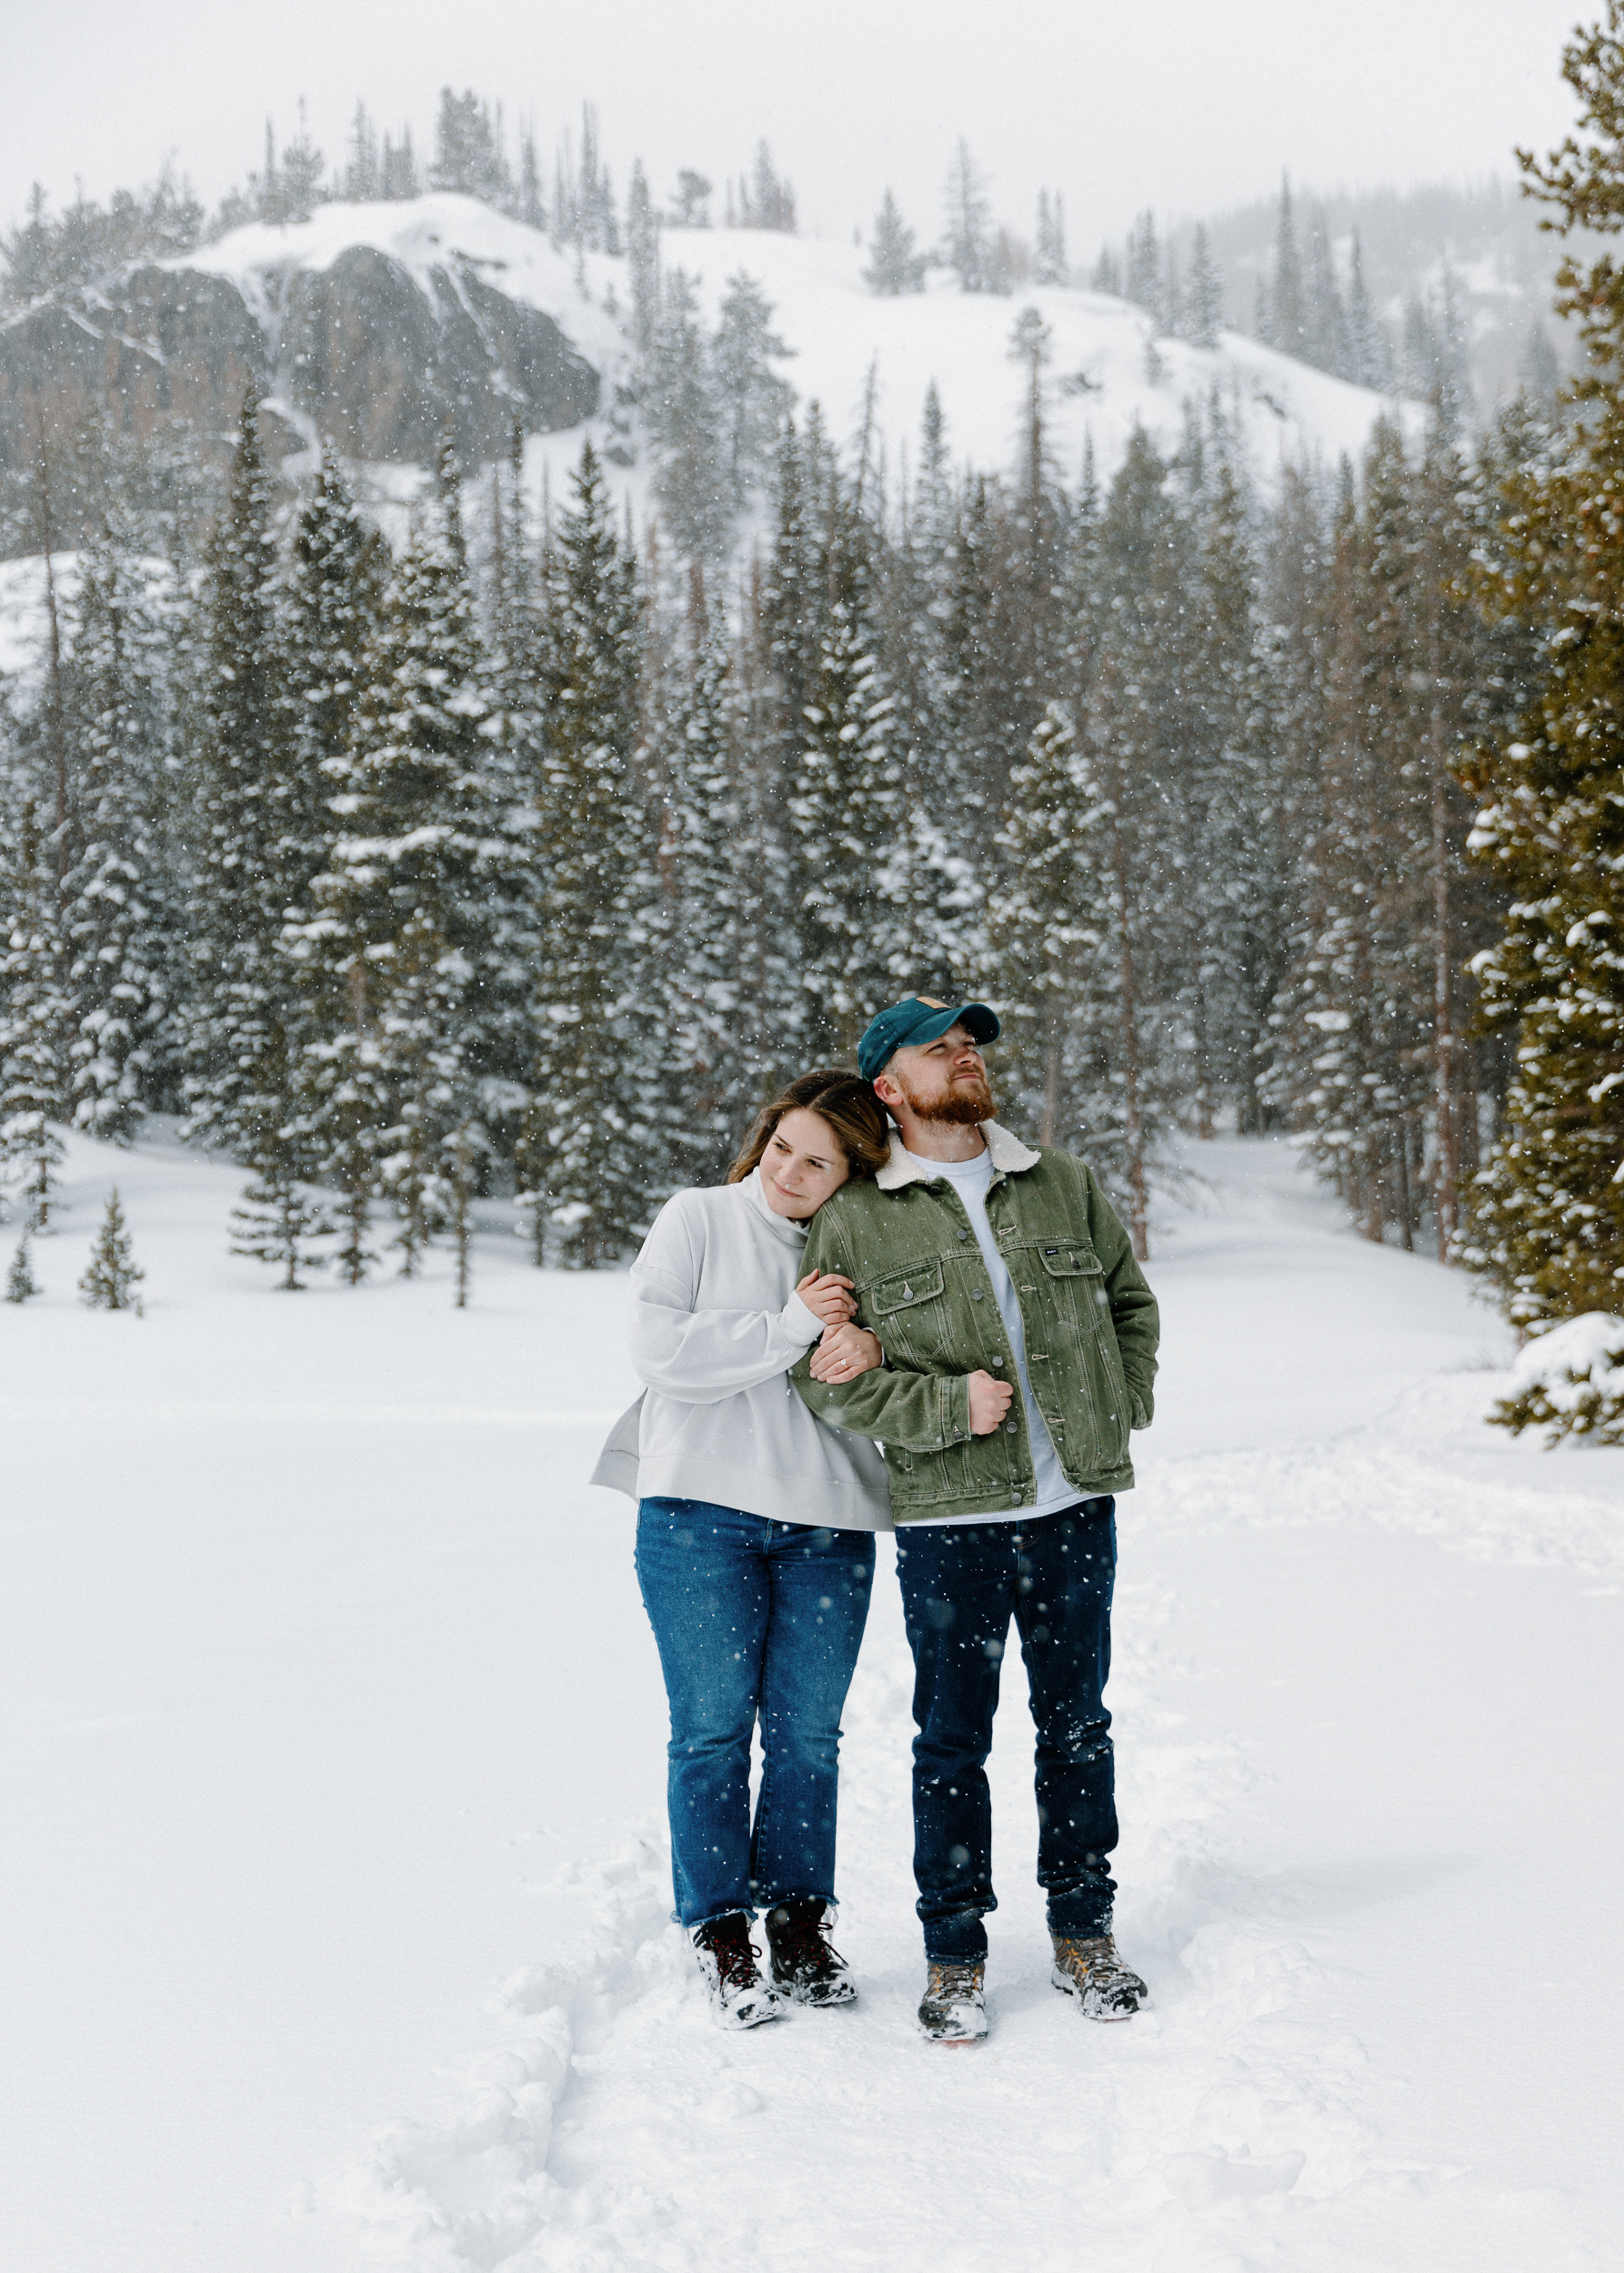 A loving couple embraces in a winter wonderland at Rocky Mountain National Park, surrounded by pristine snow-covered landscapes and majestic snow-capped peaks